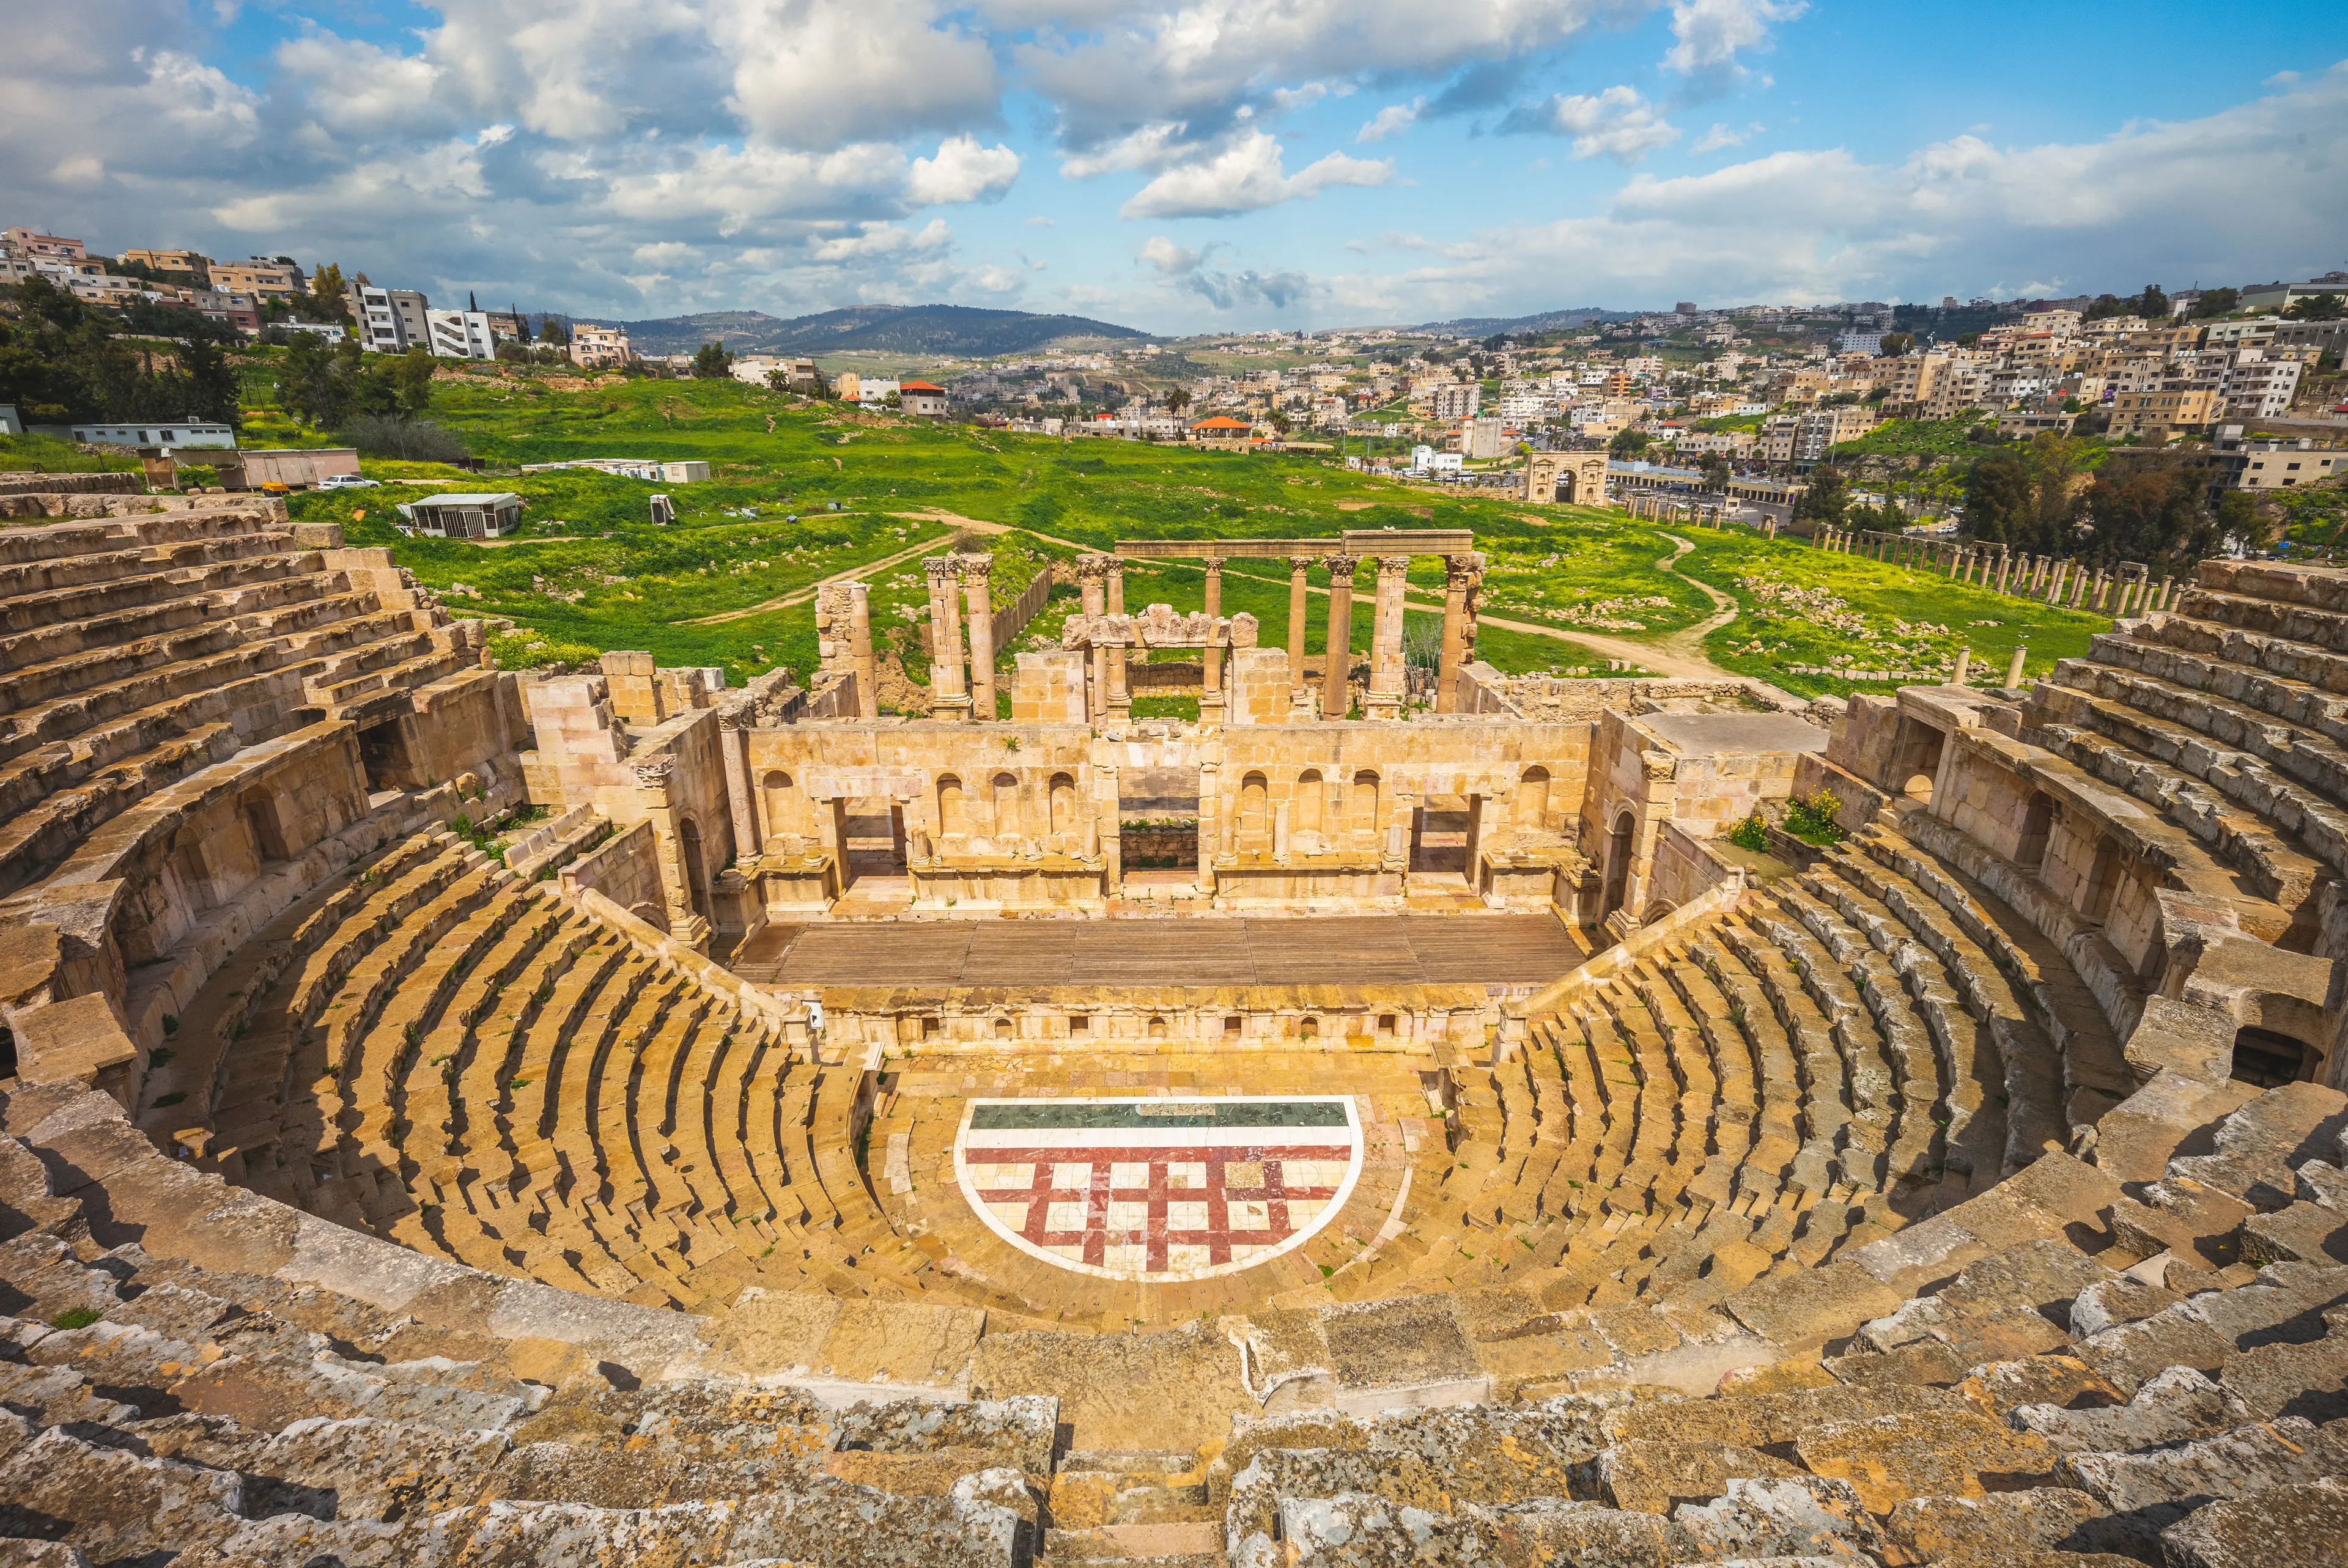 1-Day Romantic Food, Wine & Sightseeing Tour in Jerash for Locals